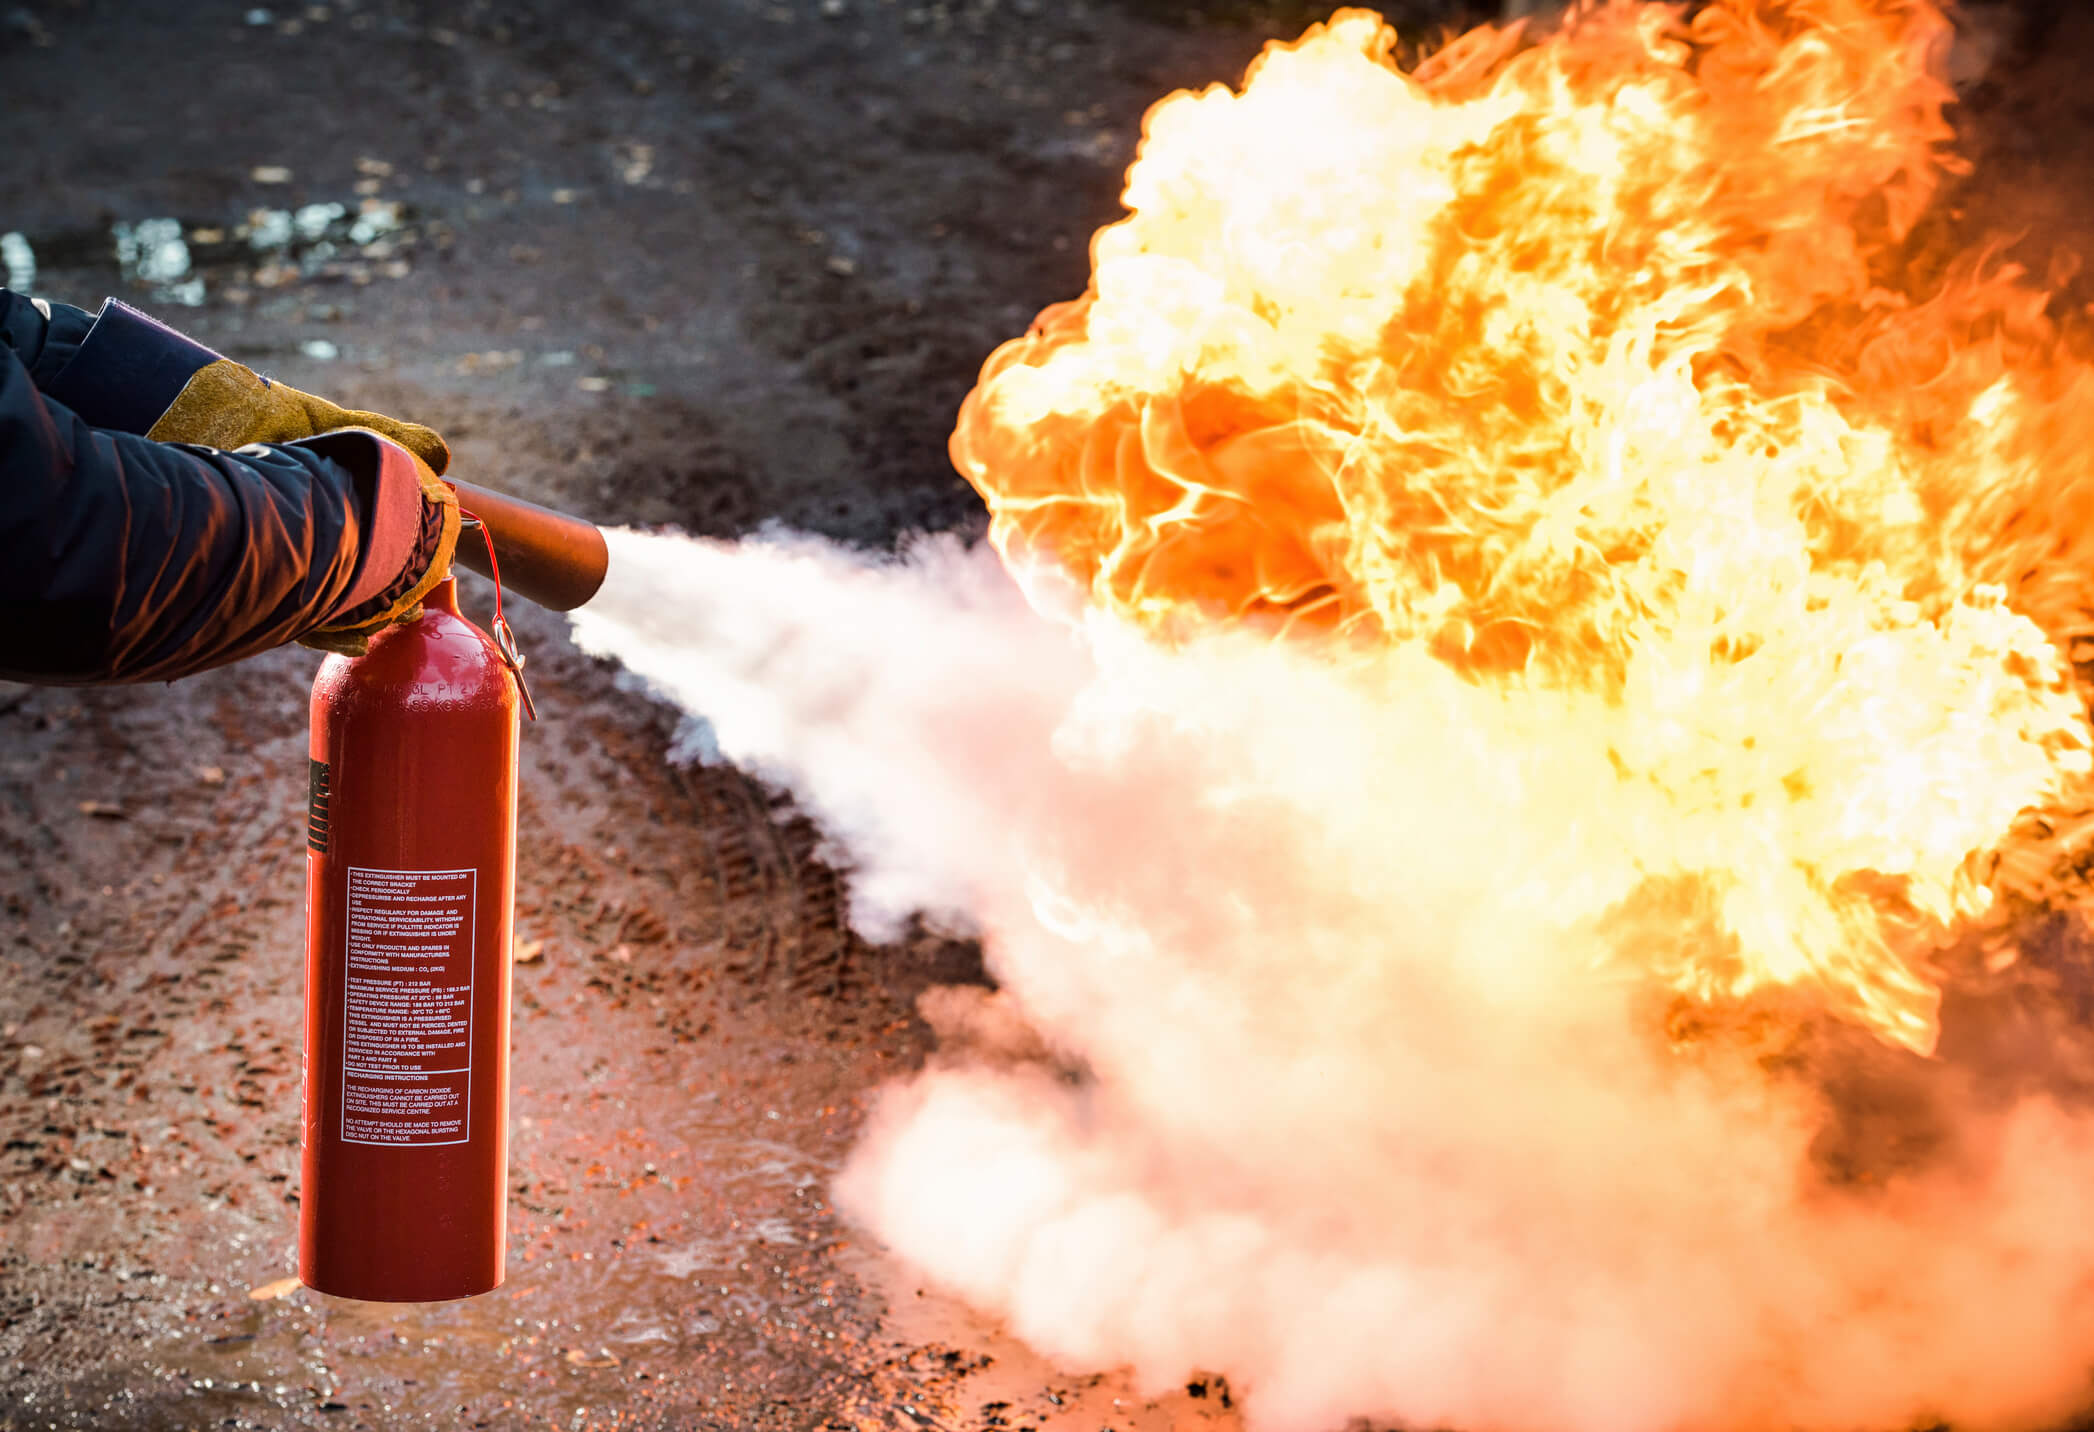 fire extinguisher putting out fire